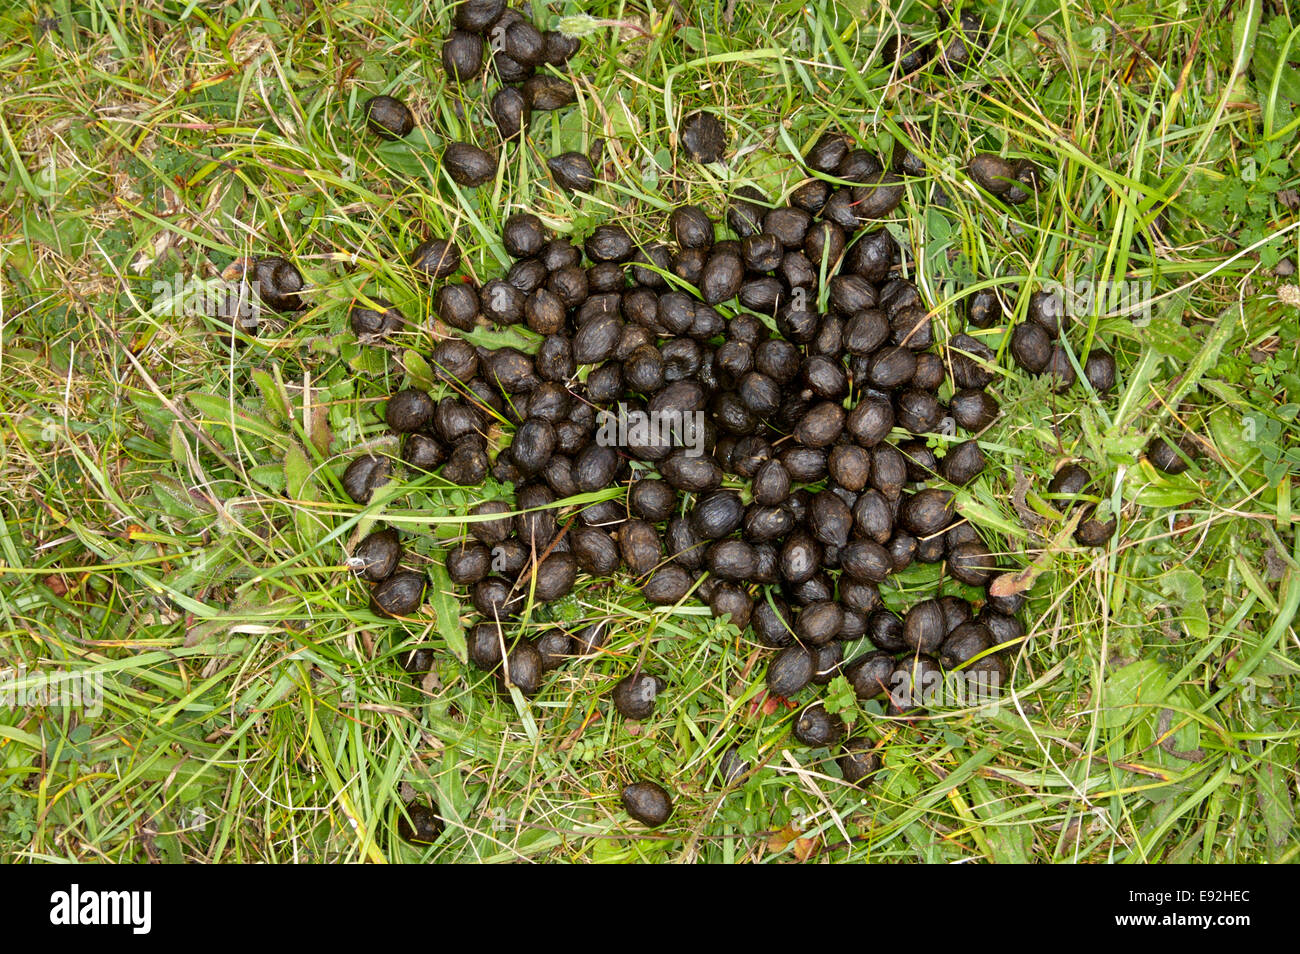 Sheep droppings - Ovis aries Stock Photo